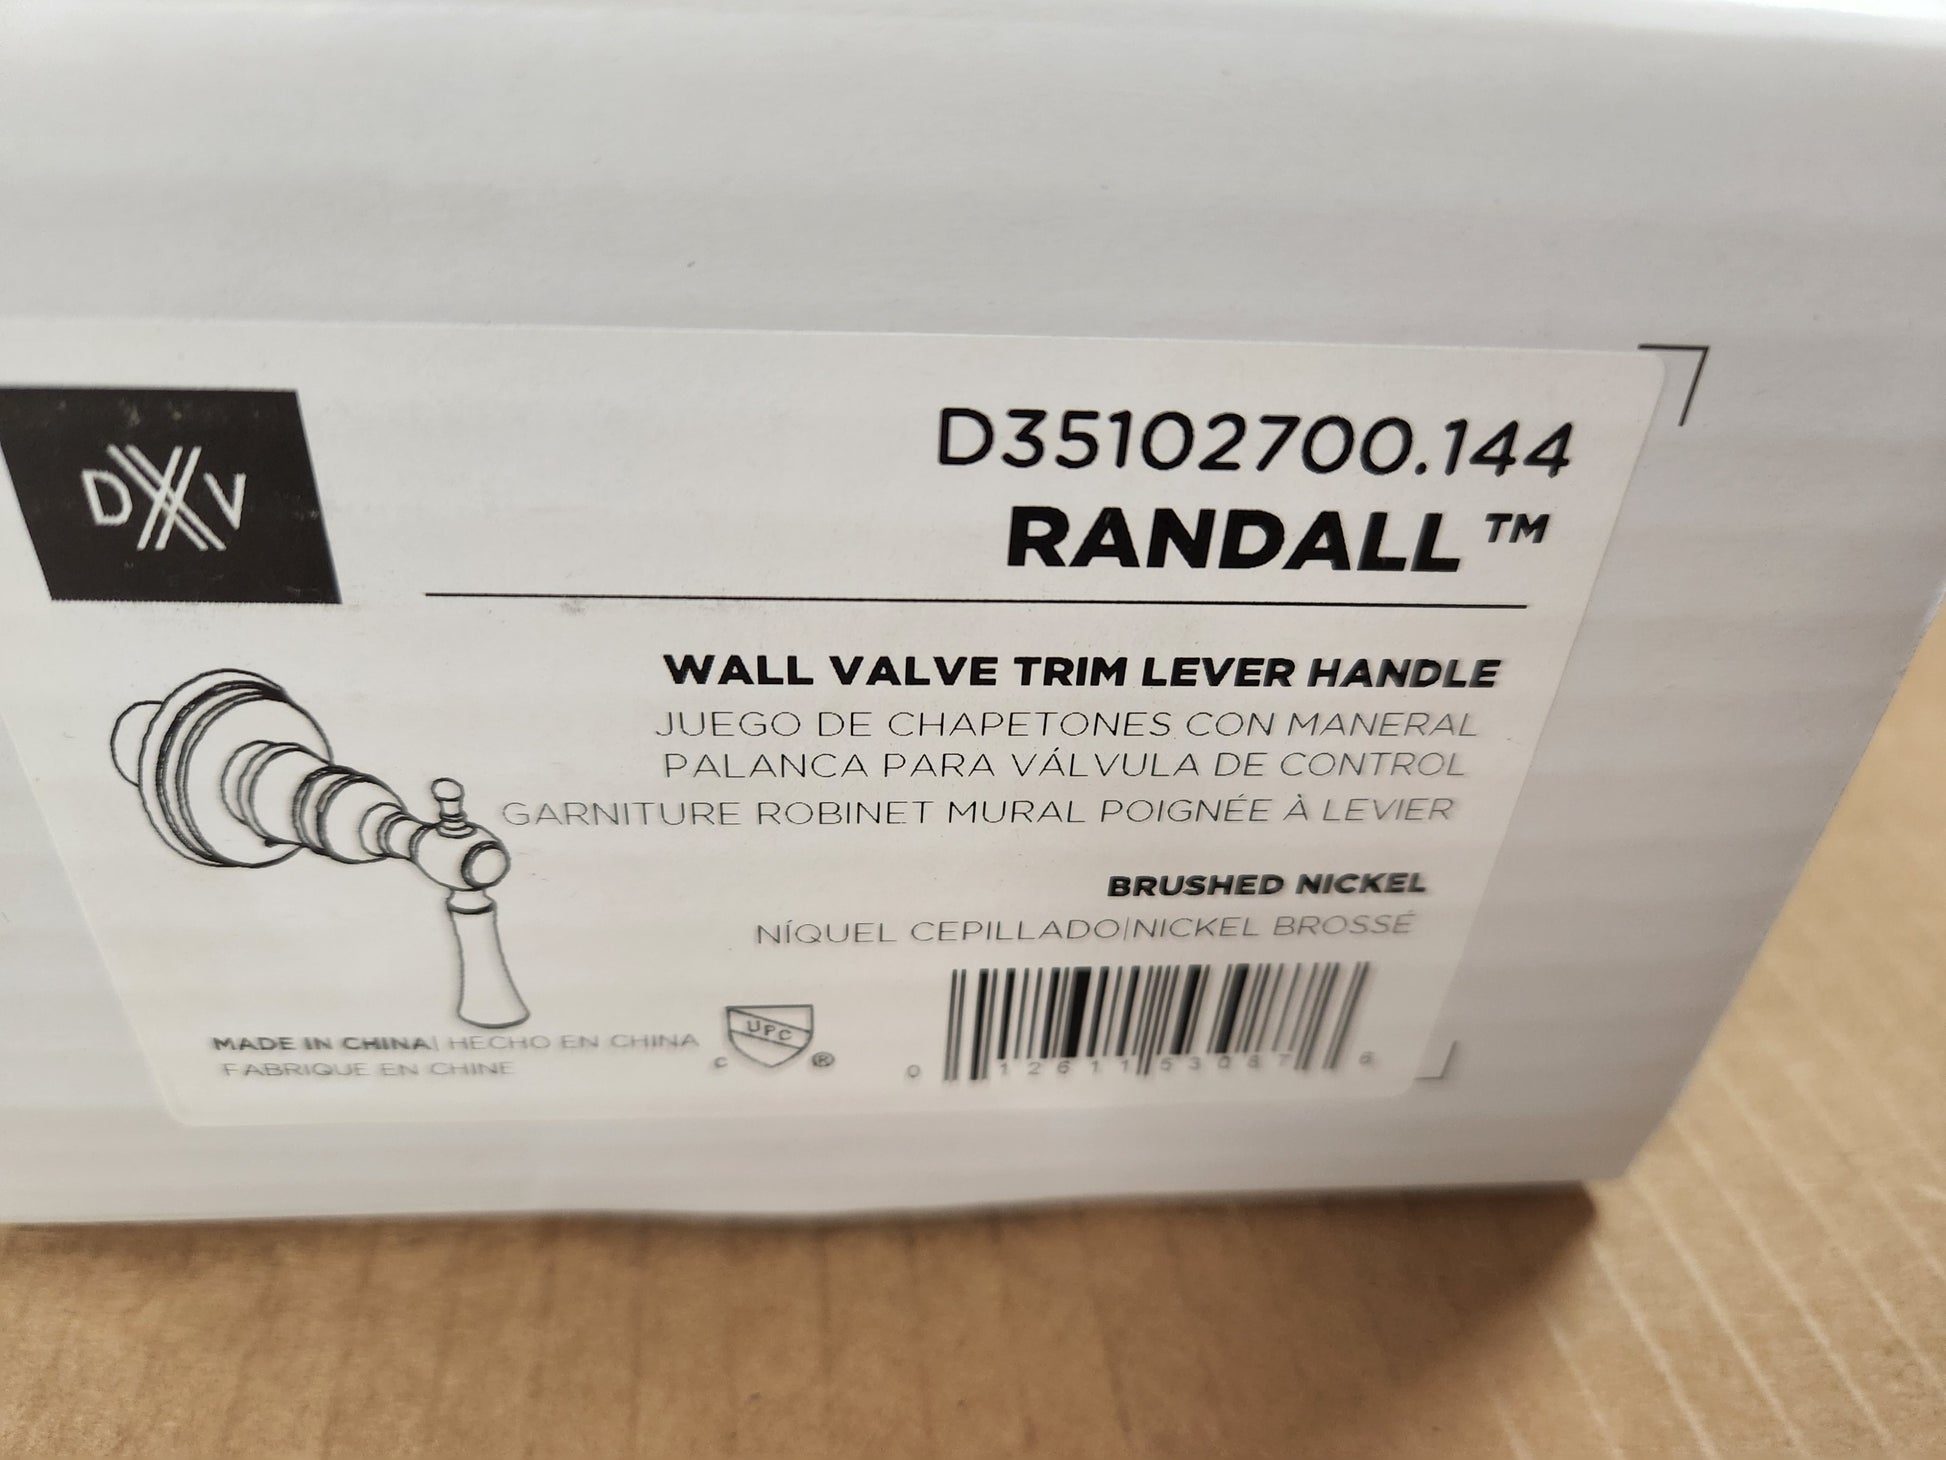 RANDALL BRUSHED NICKEL WALL VALVE TRIM LEVER HANDLE